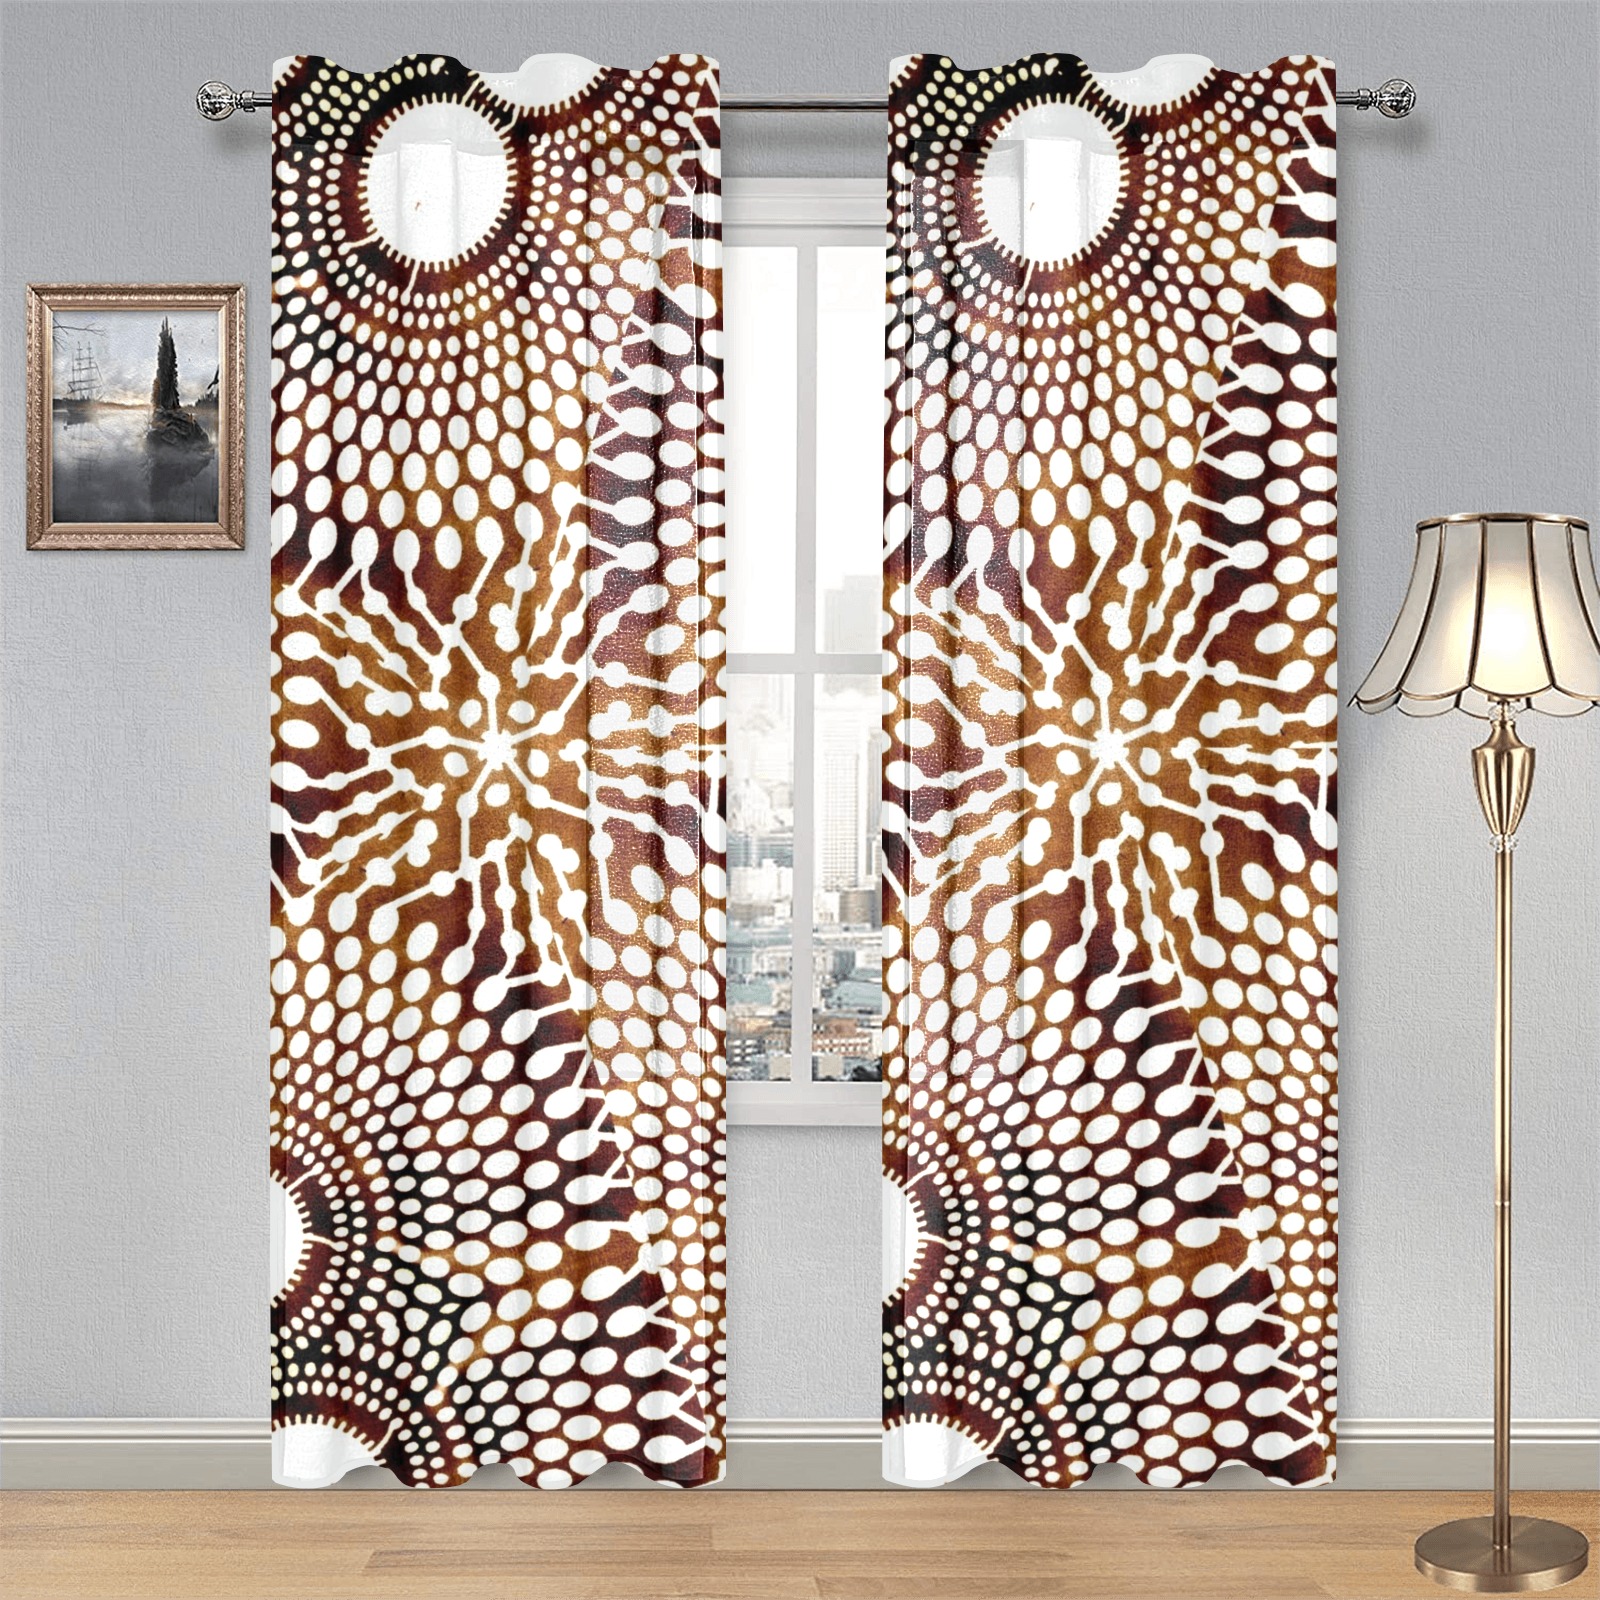 AFRICAN PRINT PATTERN 4 Gauze Curtain 28"x84" (Two-Piece)